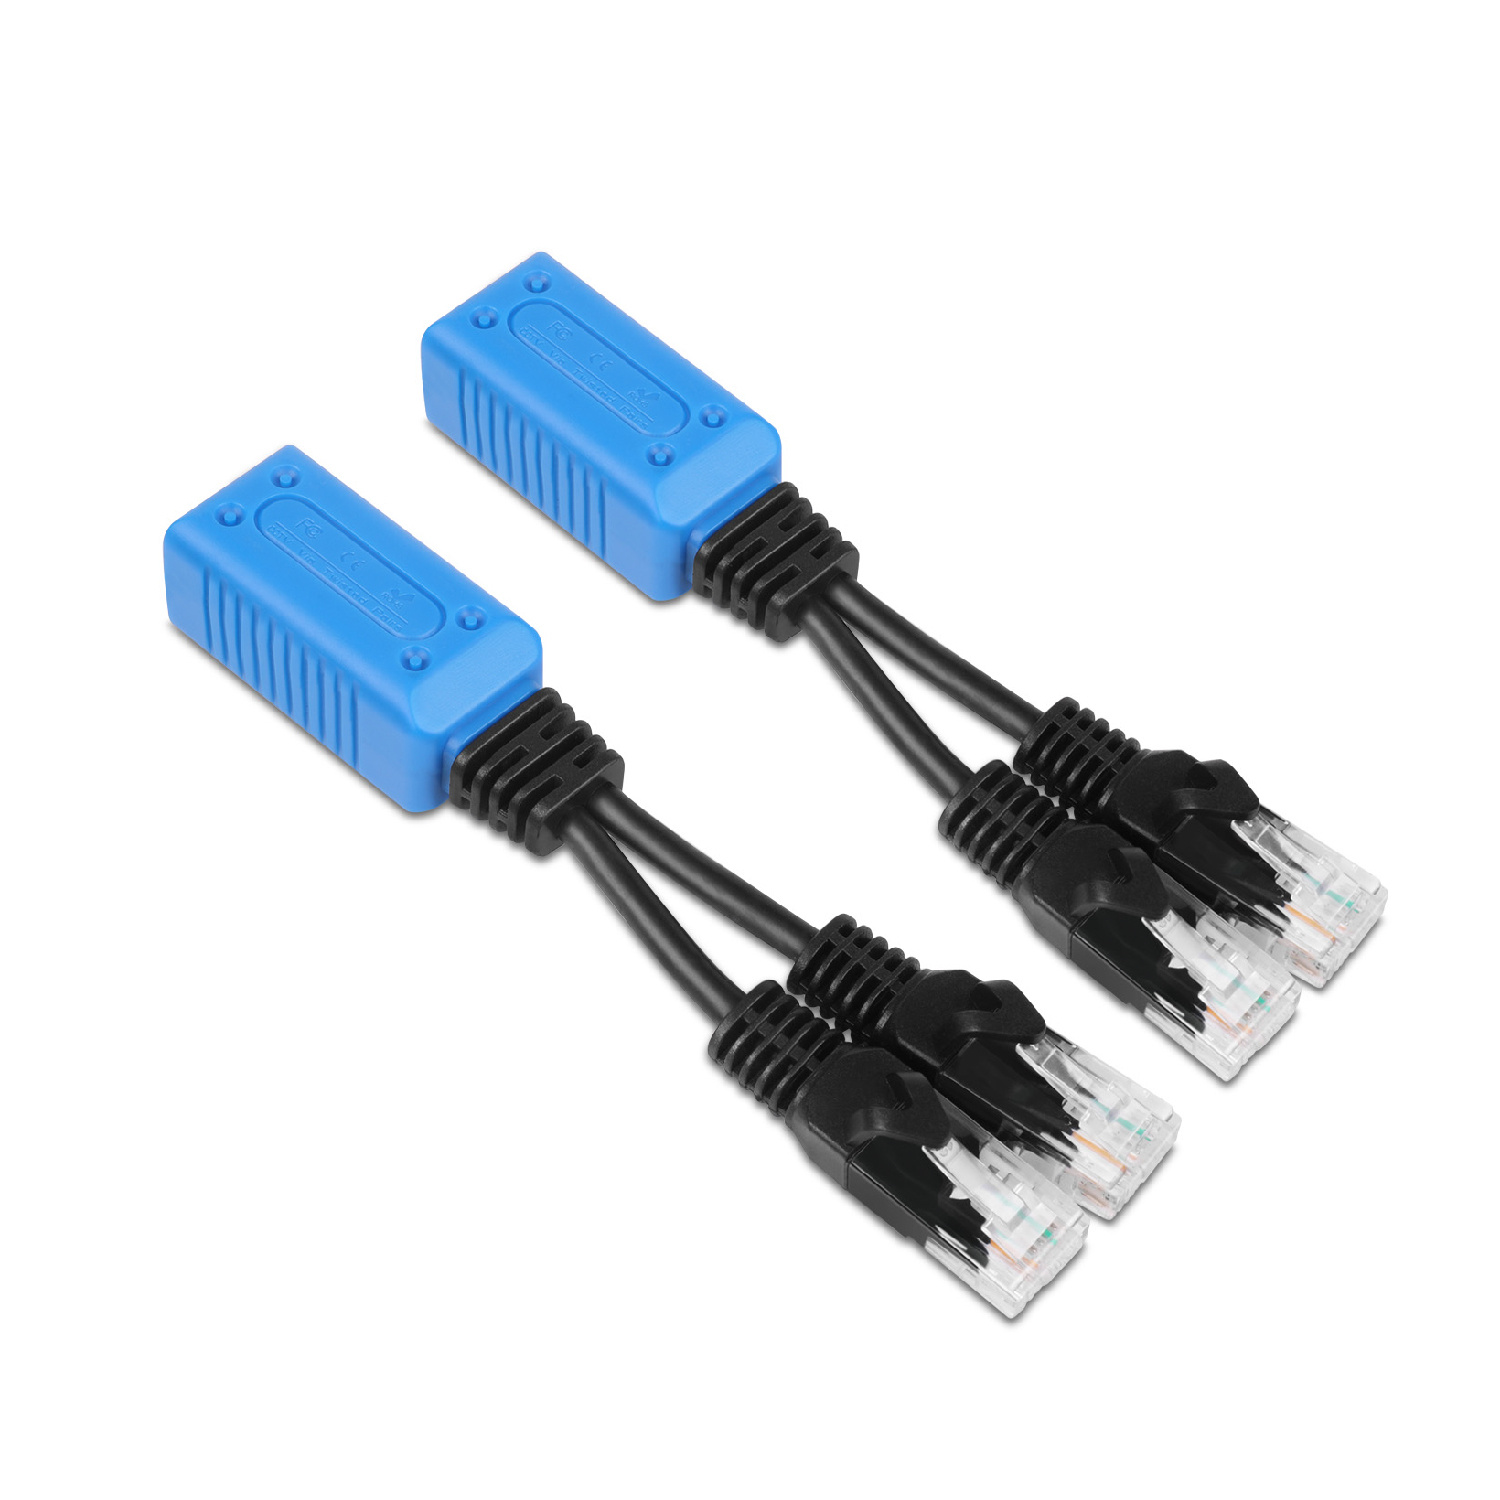 RJ45 Ethernet Cable Combiner / Splitter Kit (1 Pair) - 2 Male to 1 Female POE Data Adapter LAN Ethernet Network Extender Y Splitter Cat5 Cat5e Cat6 UPOE Cable for Surveillance Security Monitoring - image 2 of 7